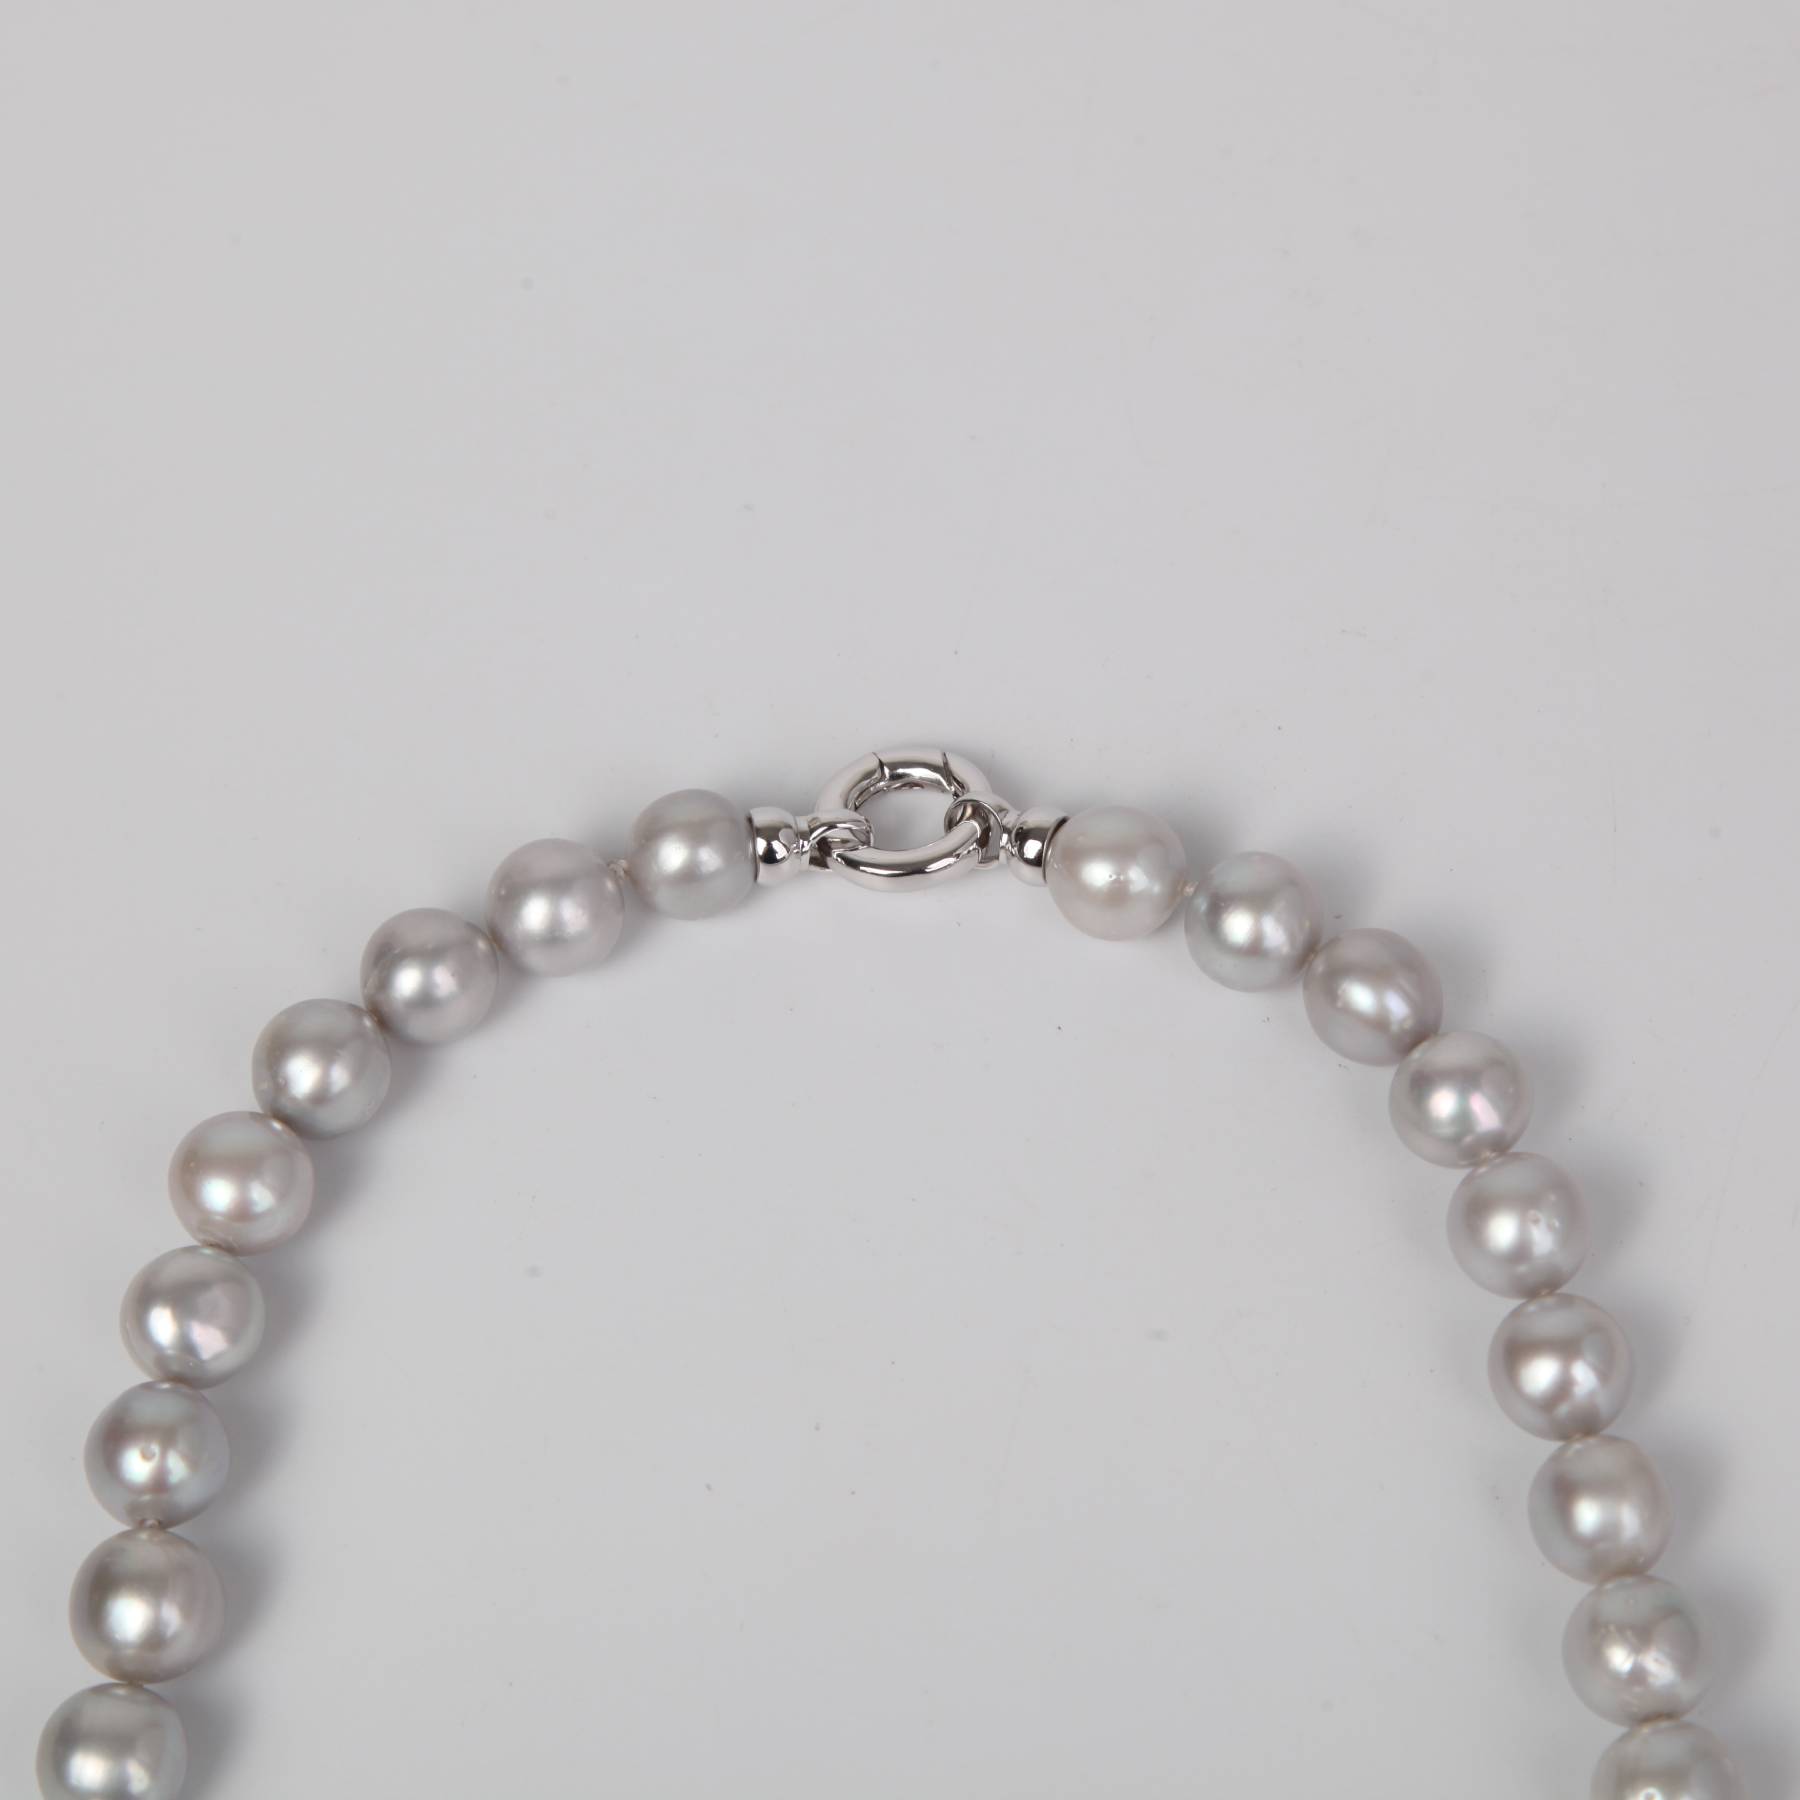 Silver Fresh Water Pearl Necklace with Sterling Silver